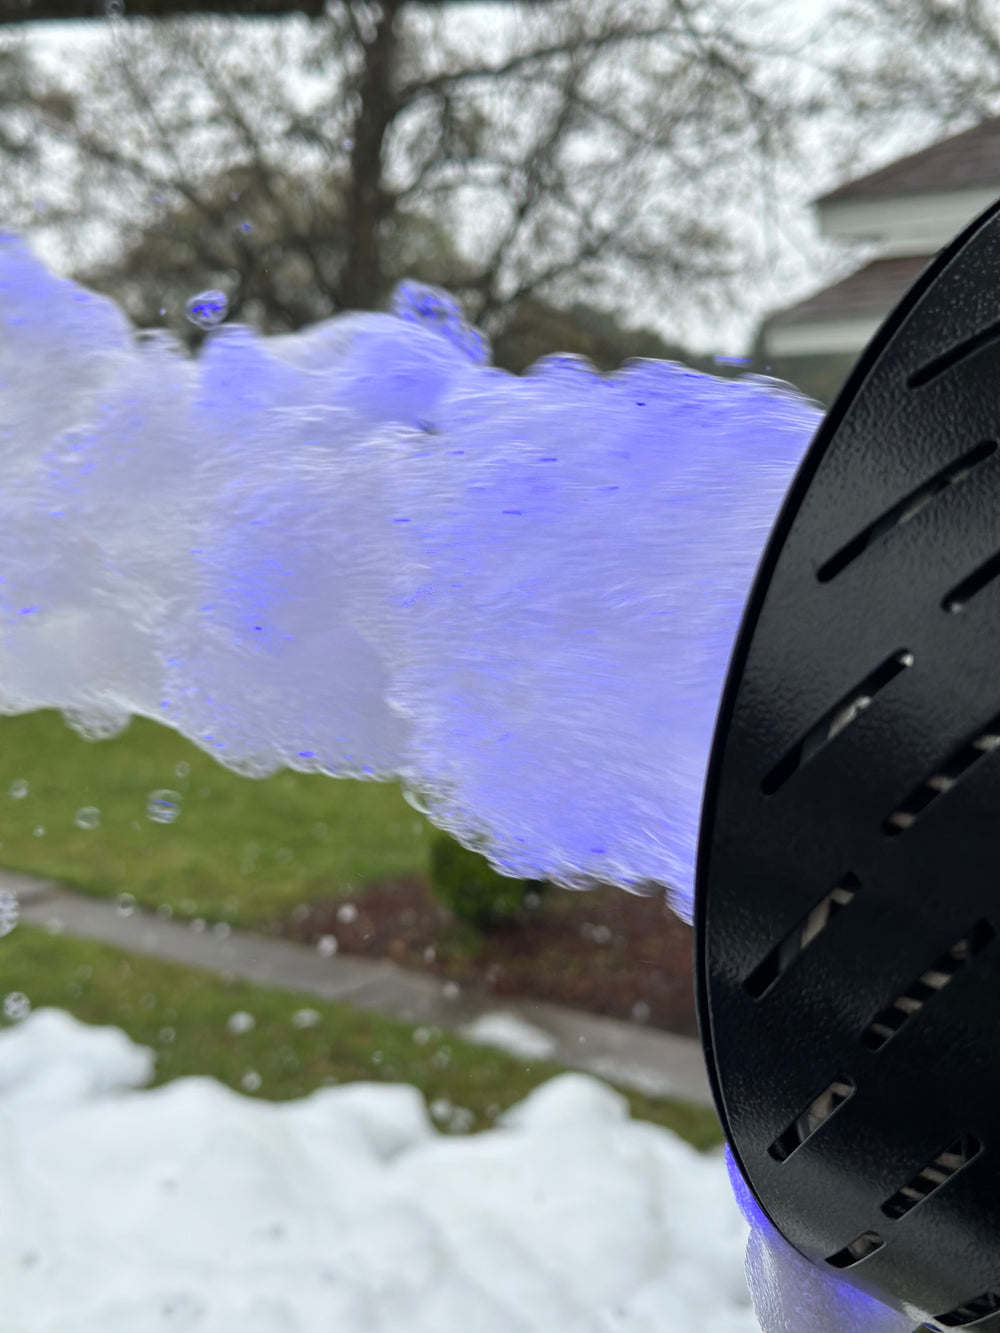 Glow foam is not needed with the LED ring attached to the front of the Foam cannon for the masses